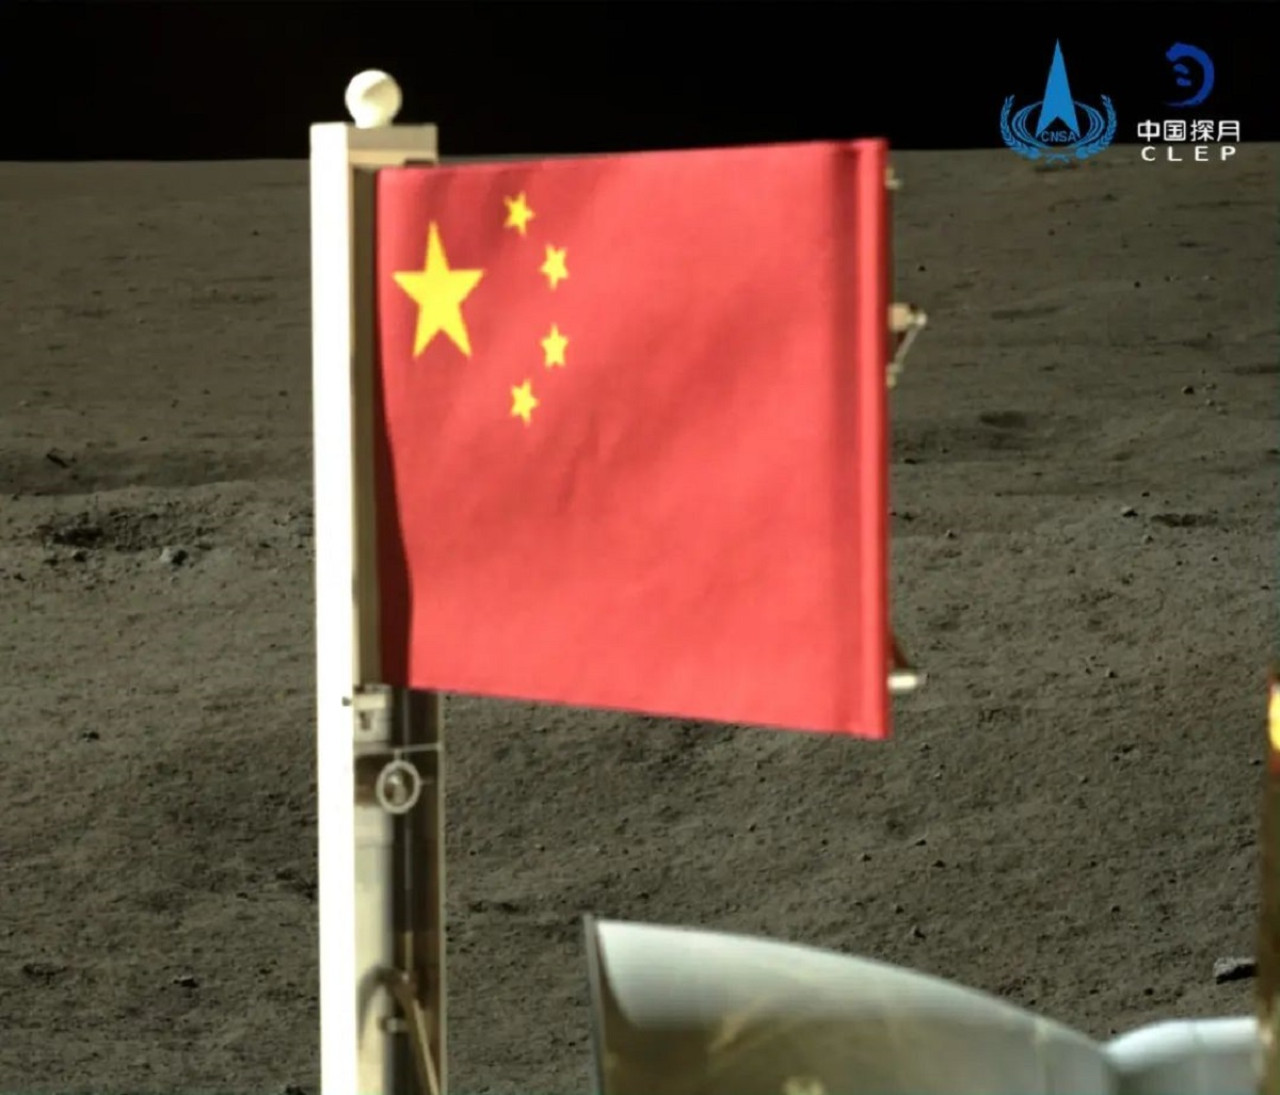 China raised its flag on the far side of the moon.  Photo: China National Space Administration